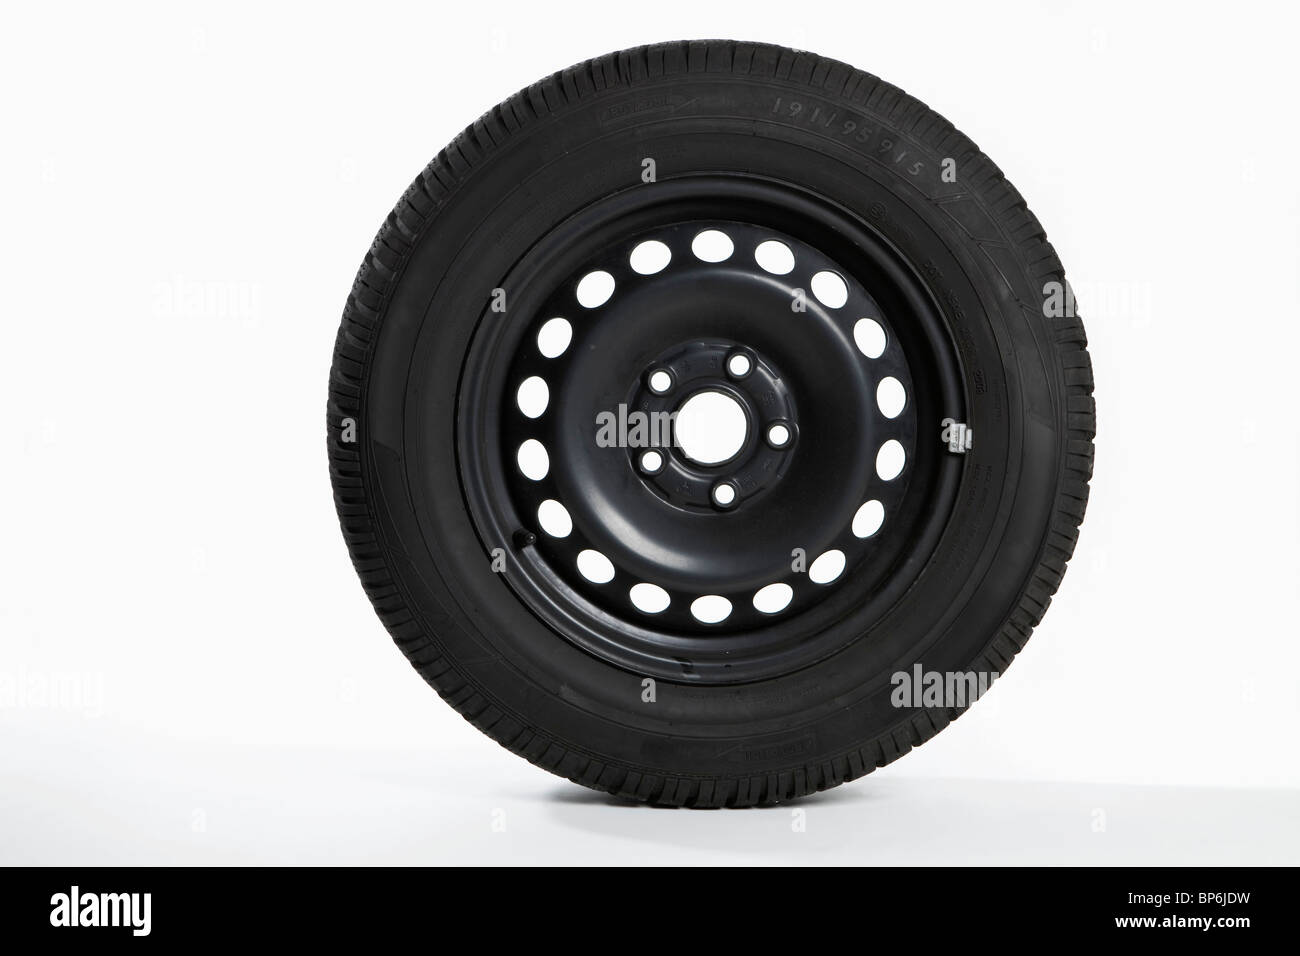 A tire, side view Stock Photo